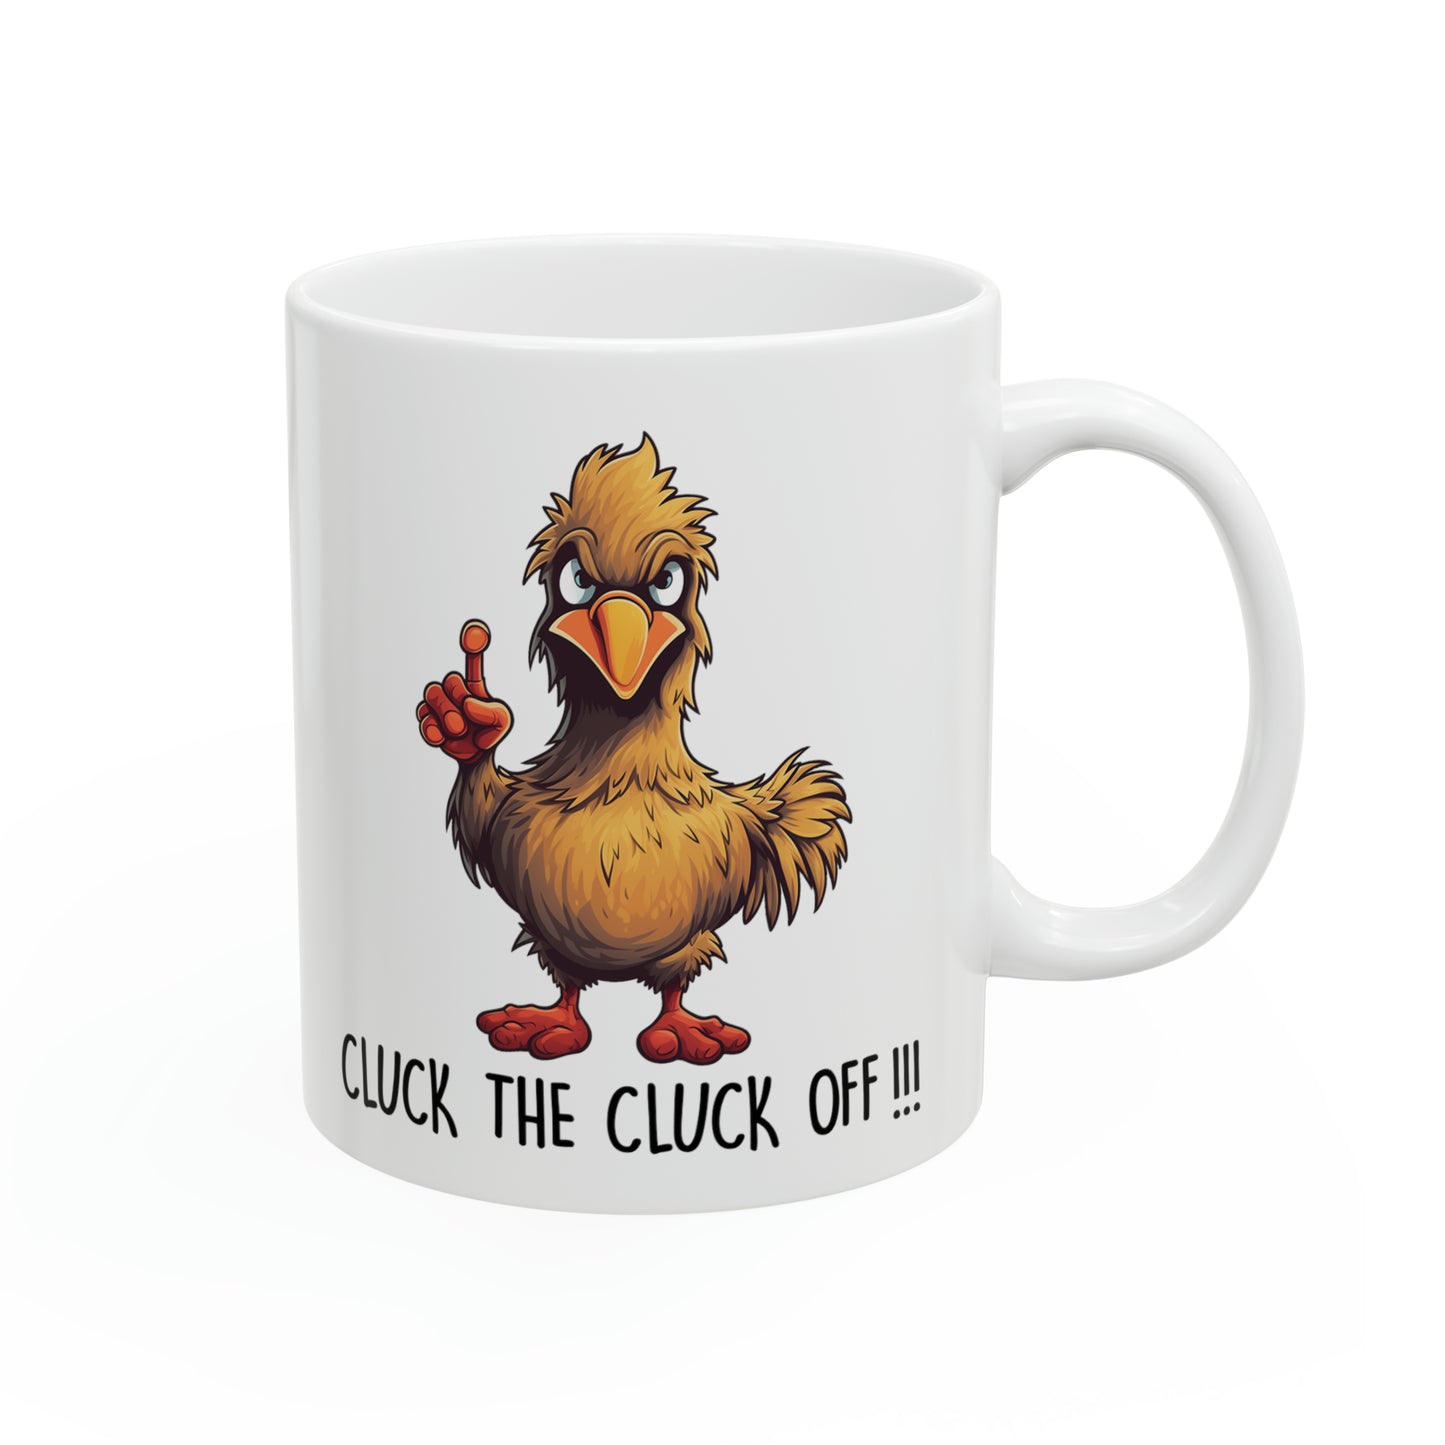 Cluck the Cluck Off!!! Humorous Chicken Mug